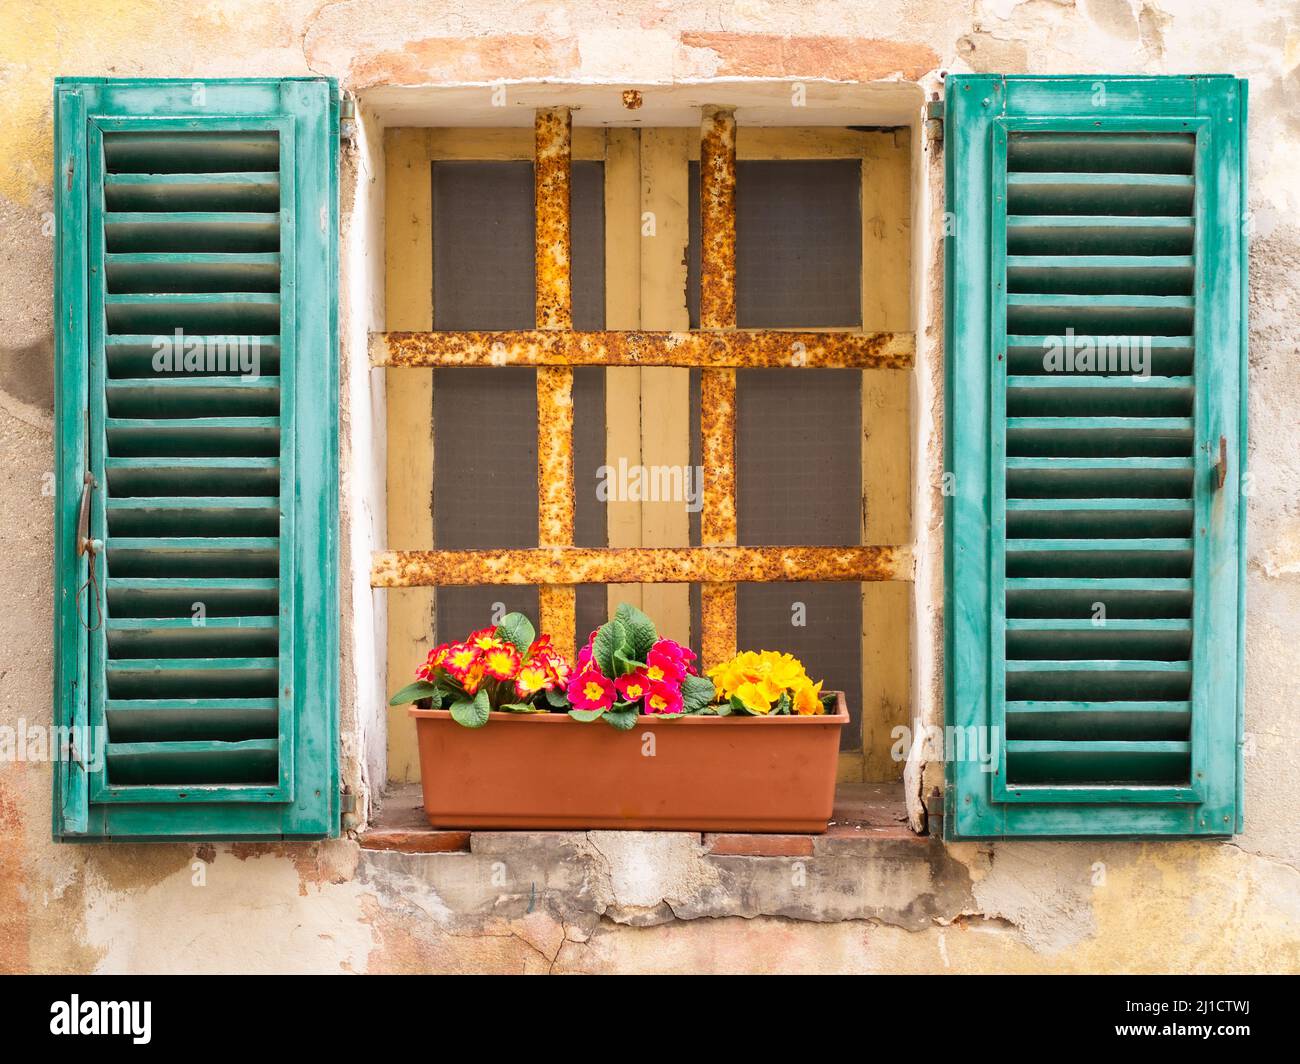 cute window with blinders and flowers on windowsill Stock Photo